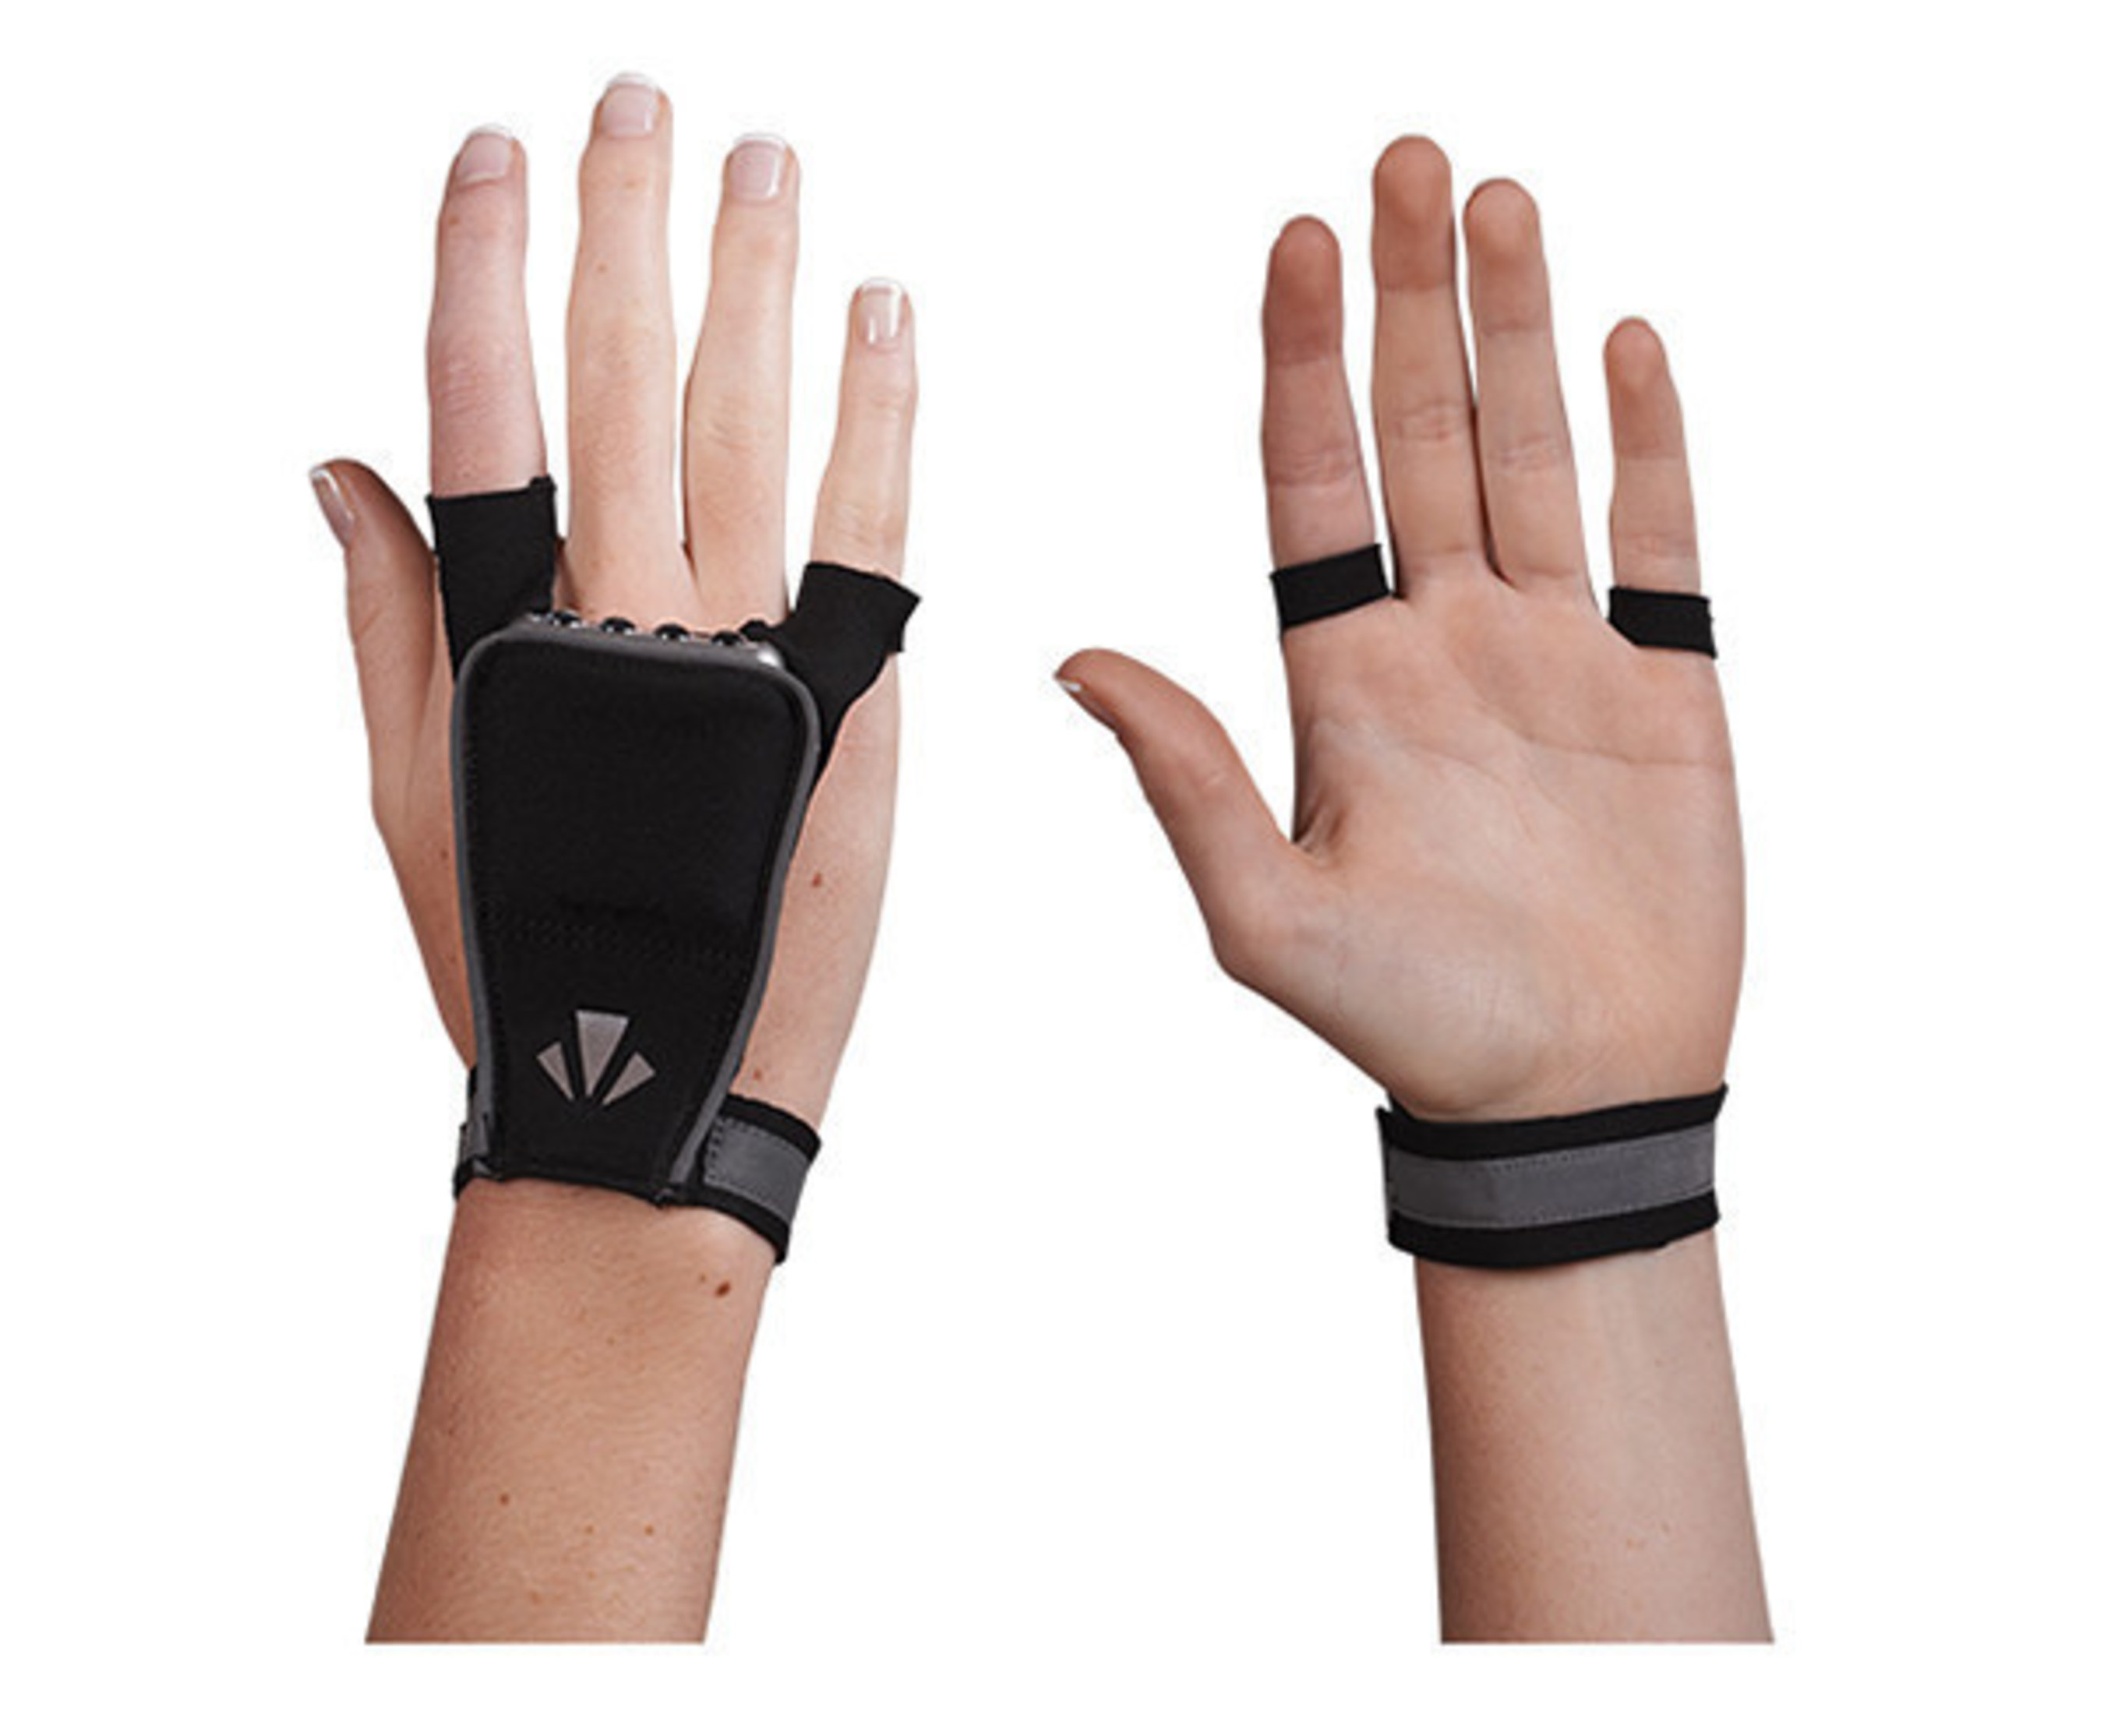 For warmer climates, the new RunLites SLING is perfect for those wanting hands-free access to light without wanting to wear an actual glove.